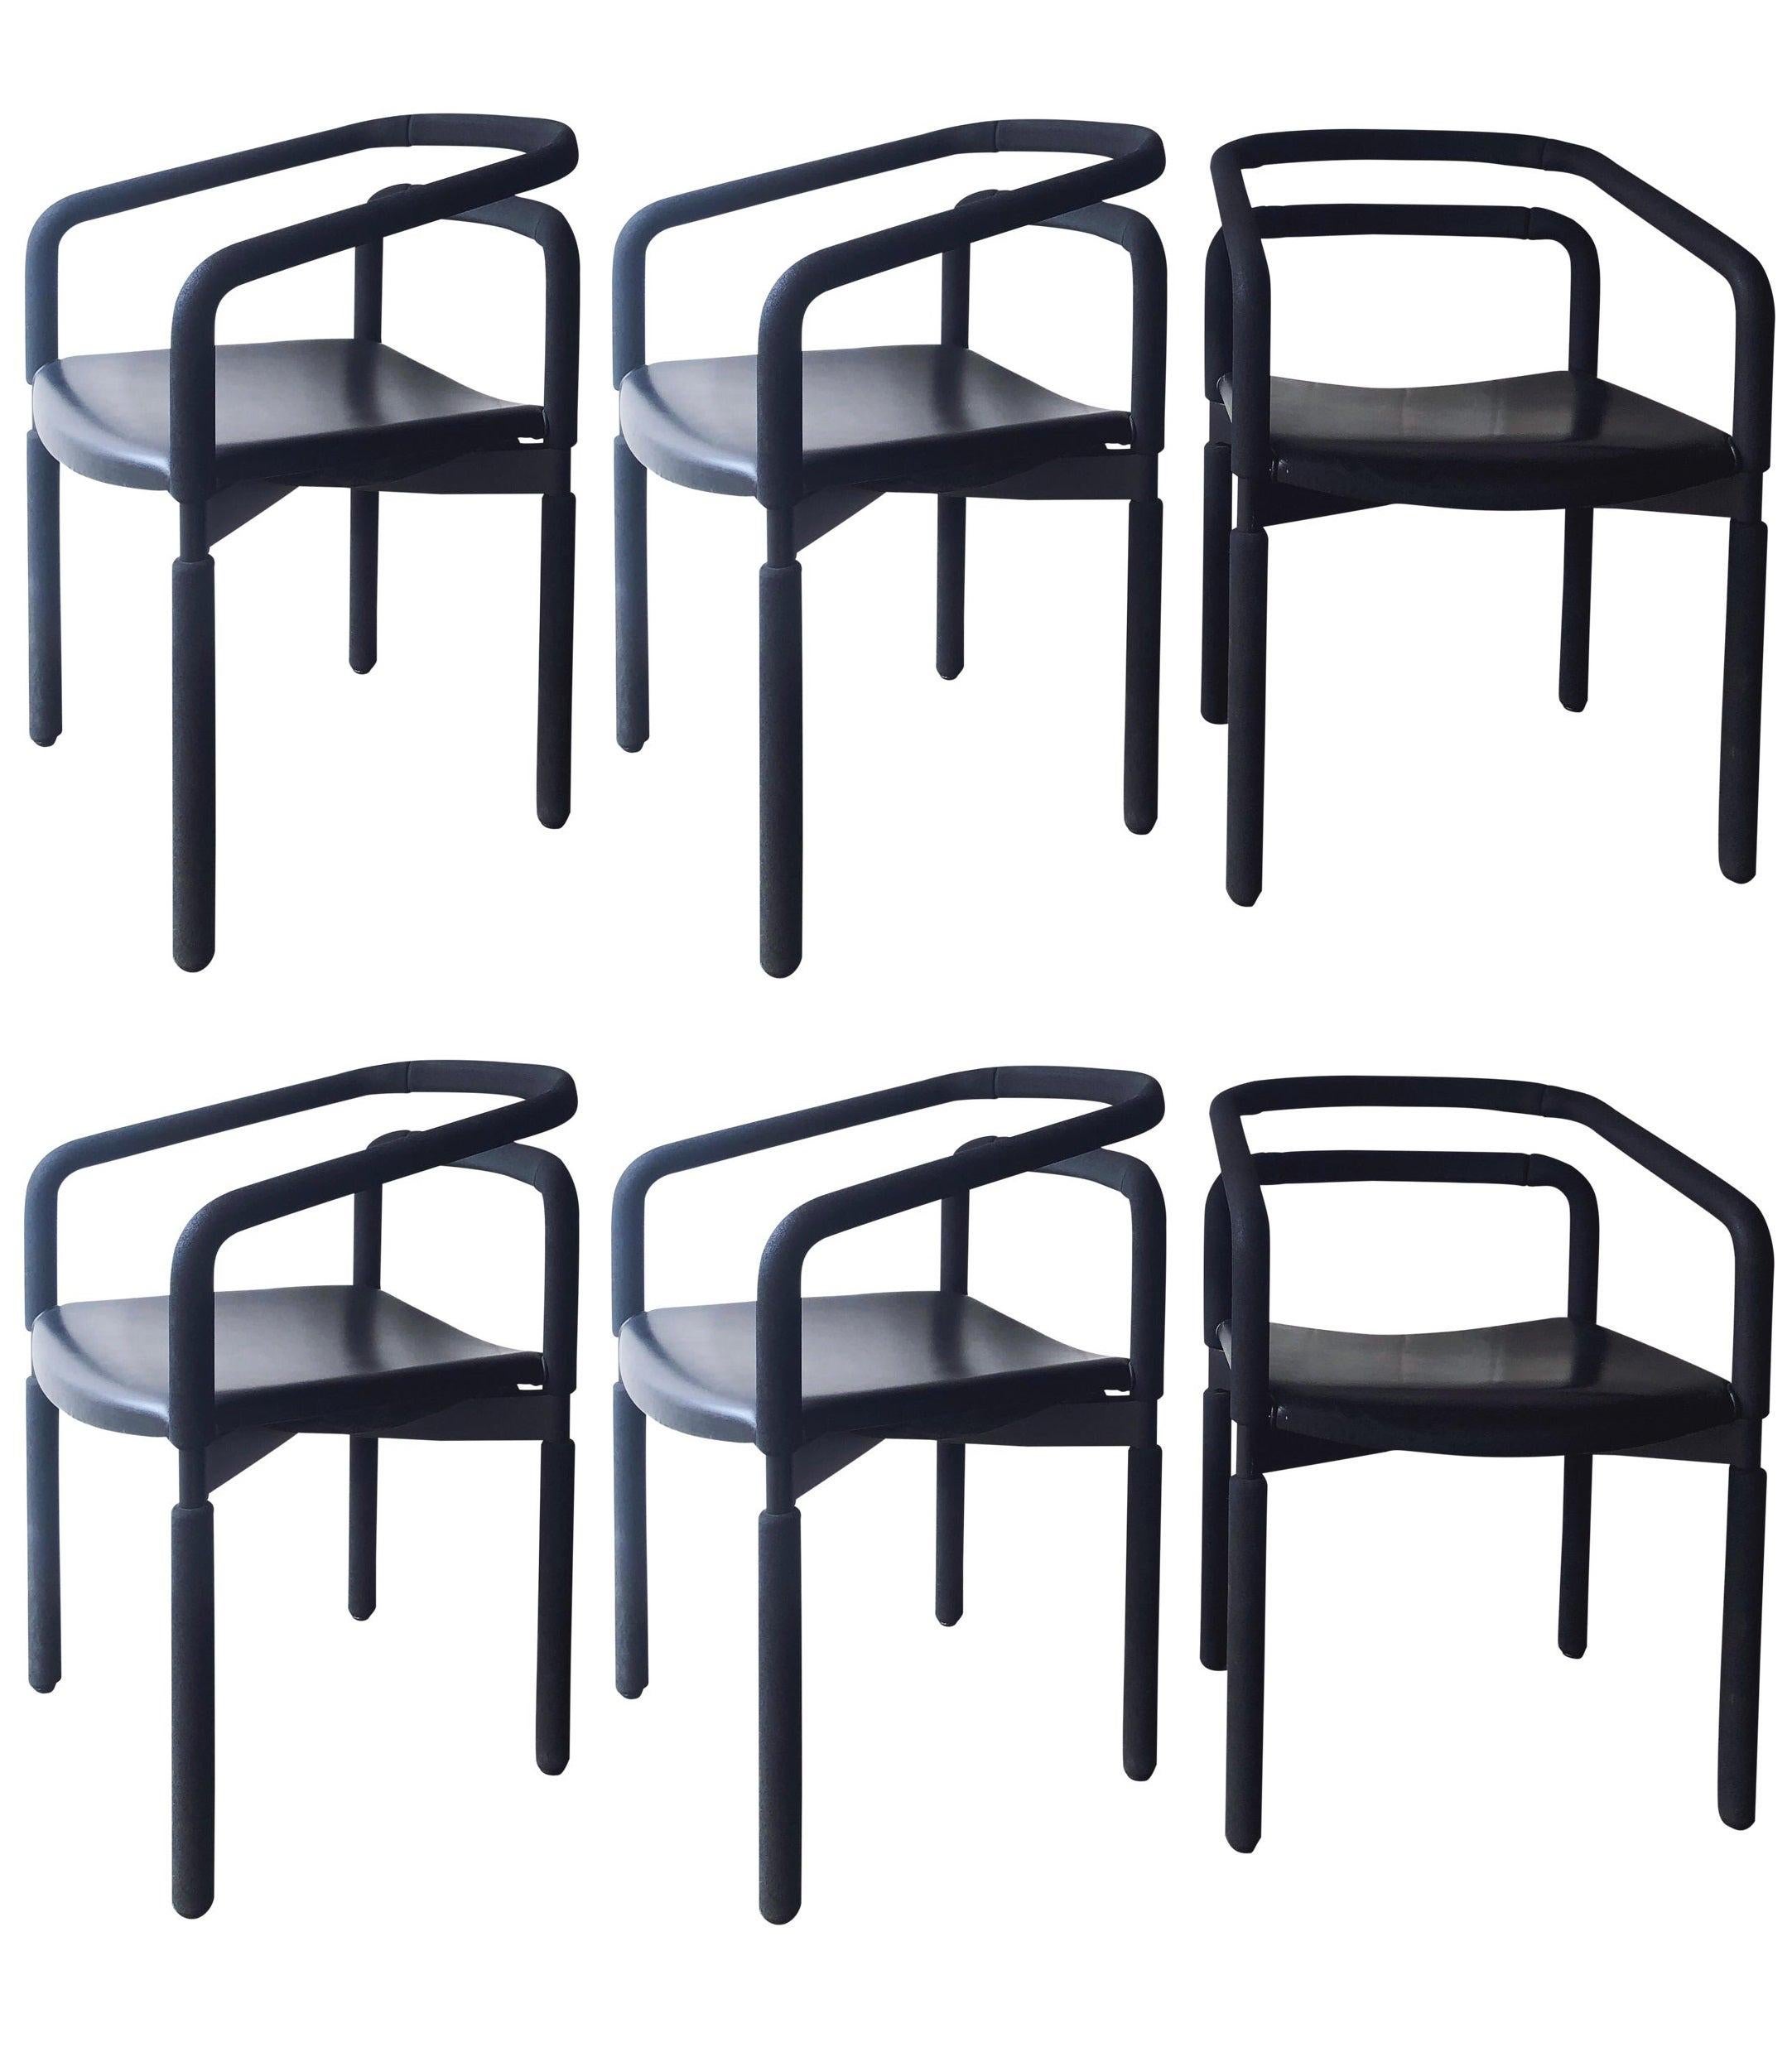 Six "Rubber Chairs" by Brian Kane for Metropolitan Furniture – Steelcase